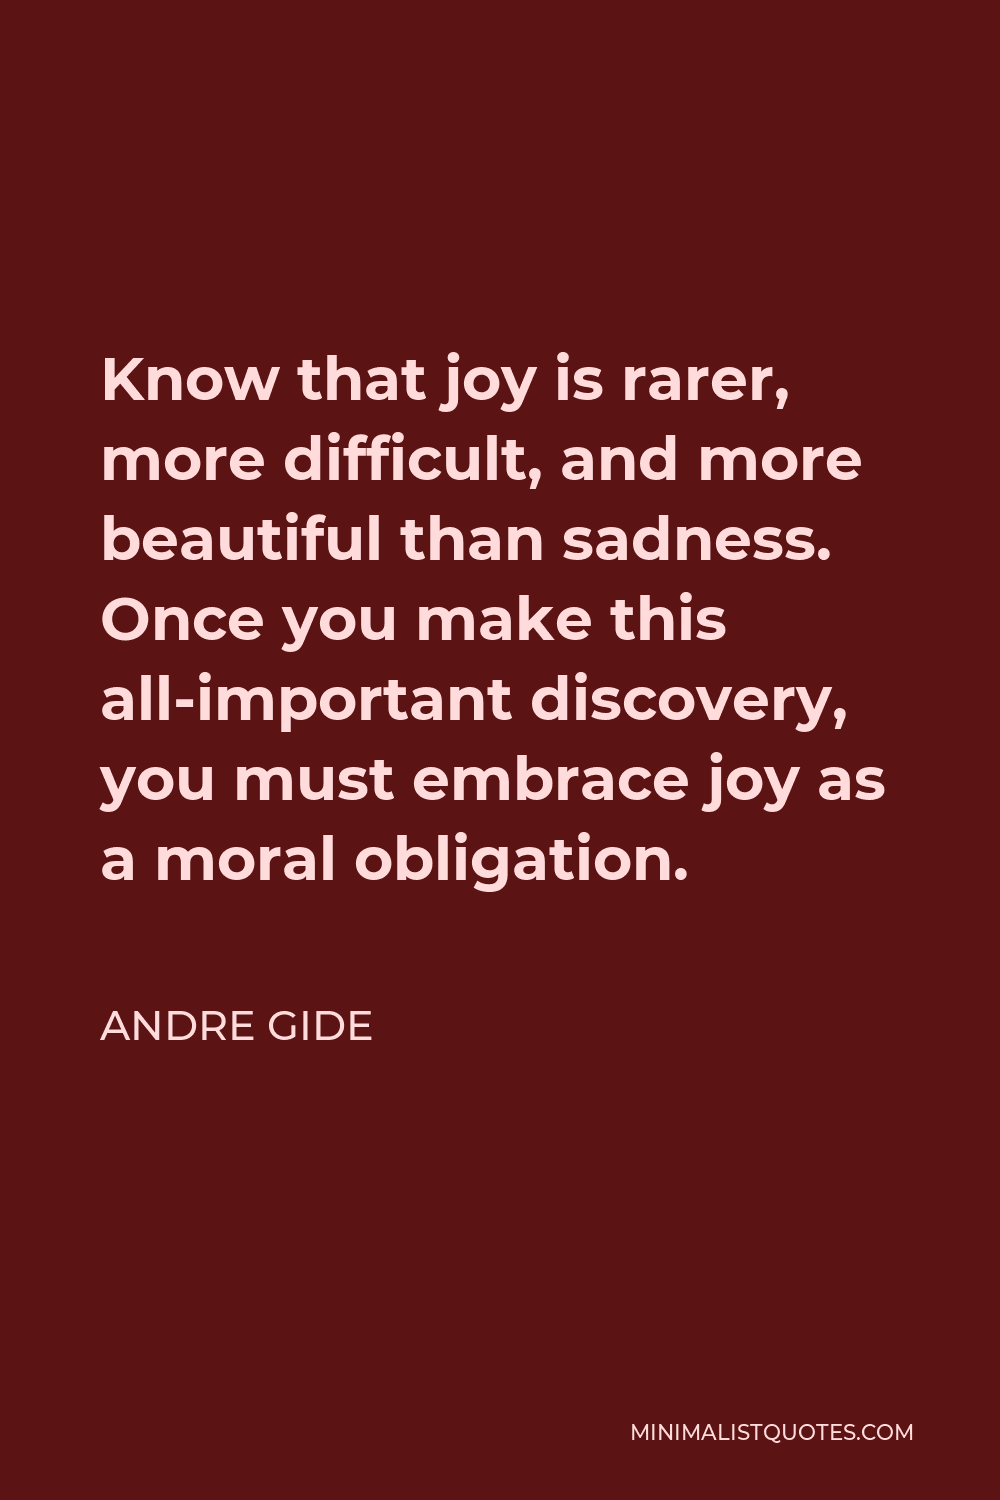 Andre Gide Quote - Know that joy is rarer, more difficult, and more beautiful than sadness. Once you make this all-important discovery, you must embrace joy as a moral obligation.